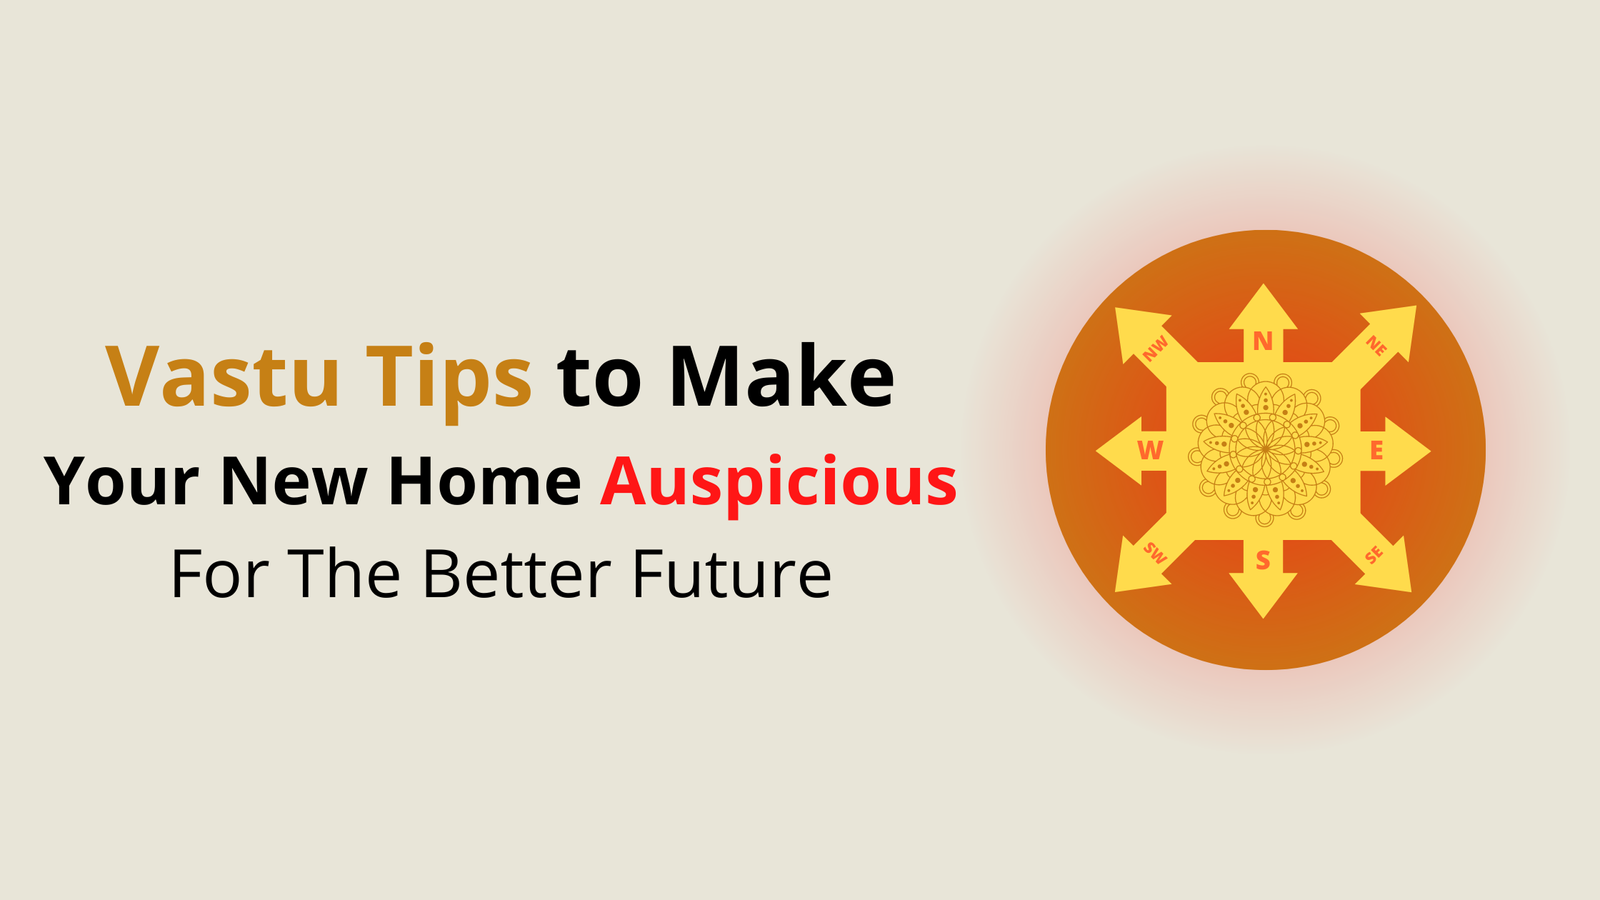 Vastu Tips For New Home to Make It Auspicious For A Better Future.